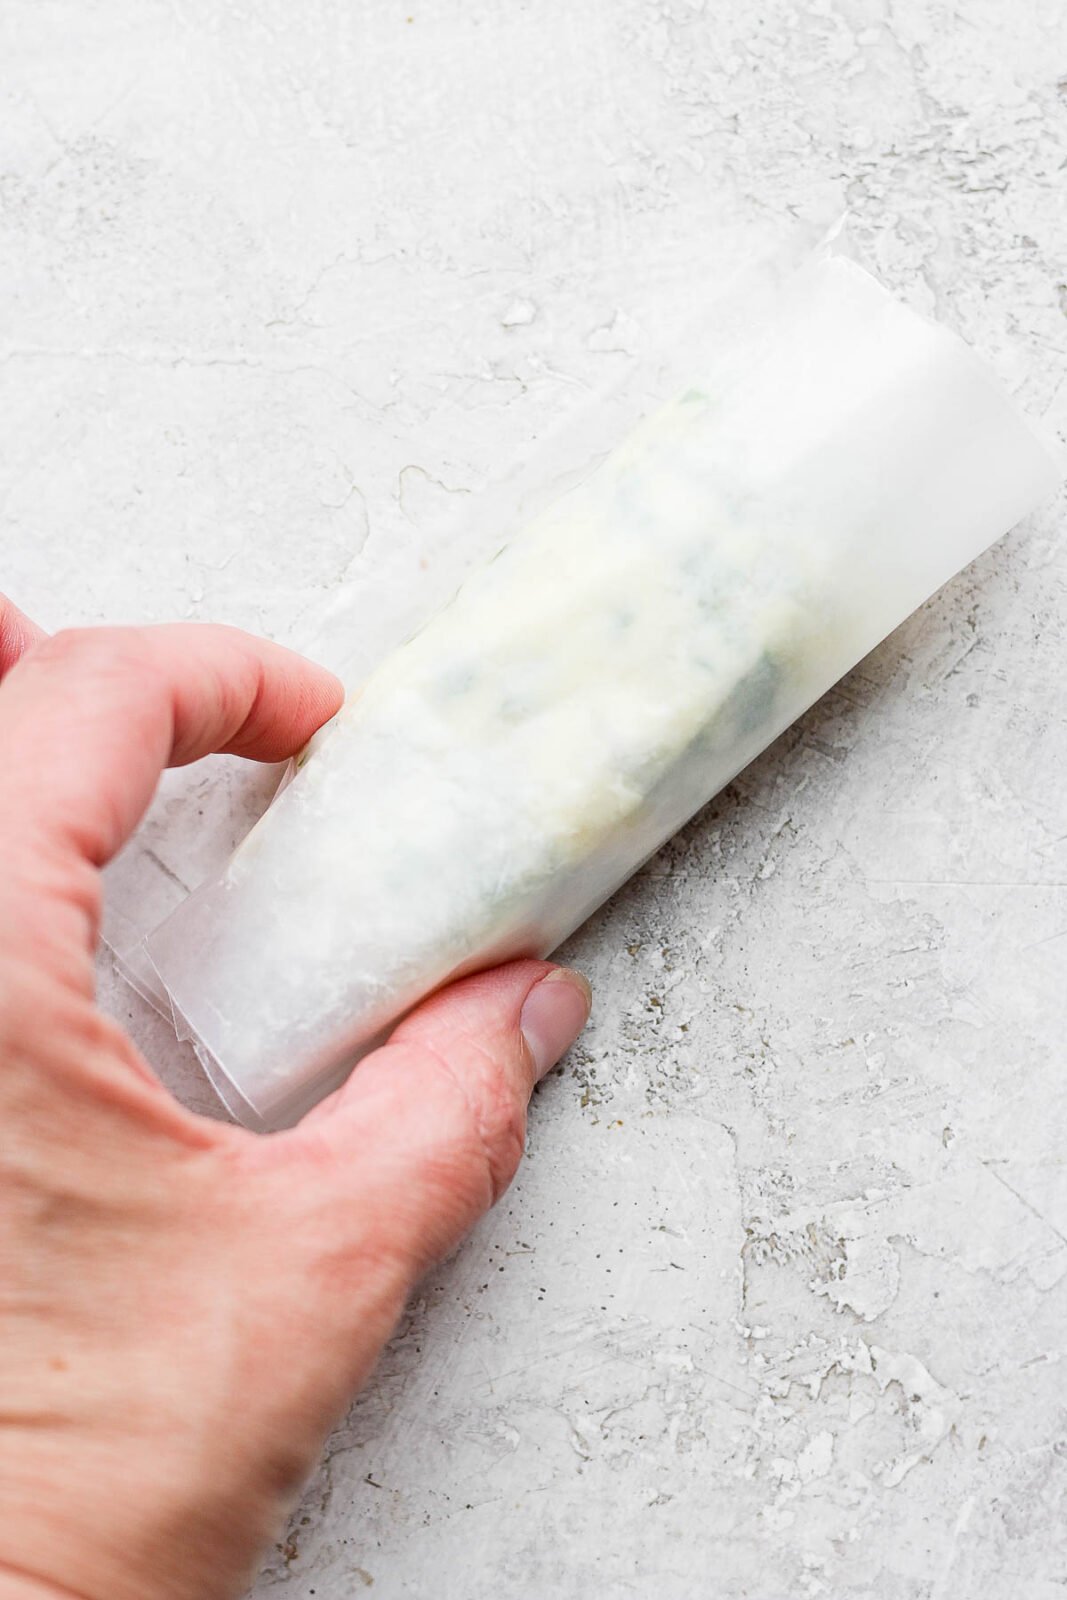 A hand holding herbed butter in wax paper.